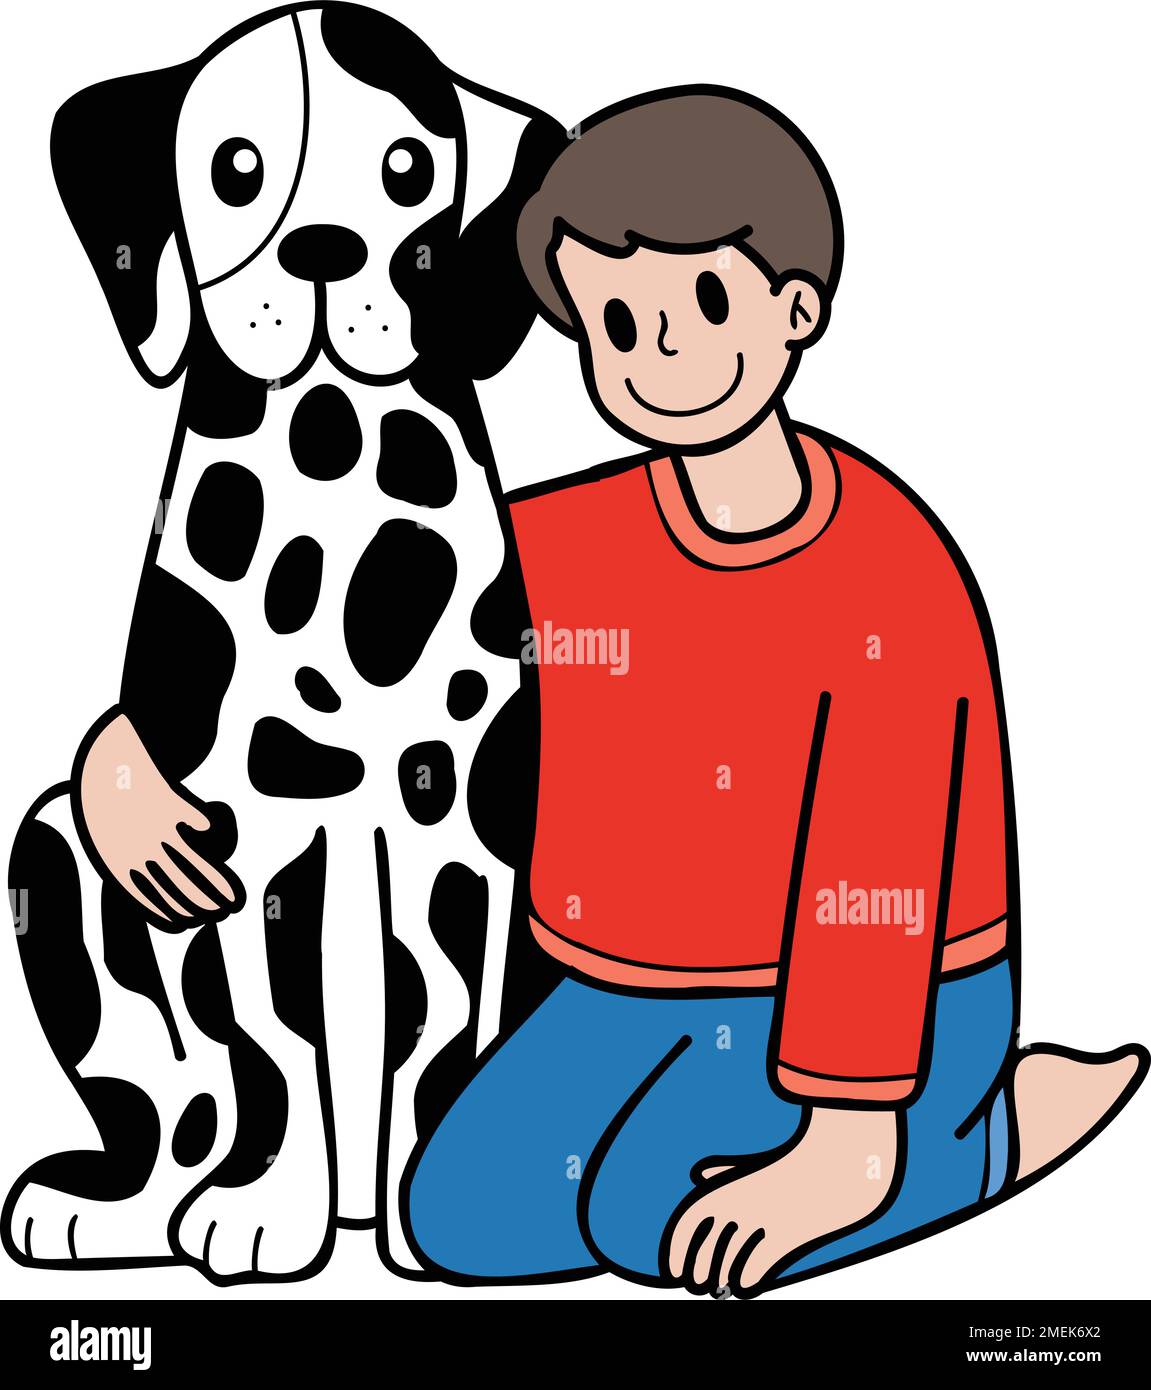 Hand Drawn owner hugs Dalmatian Dog illustration in doodle style isolated on background Stock Vector